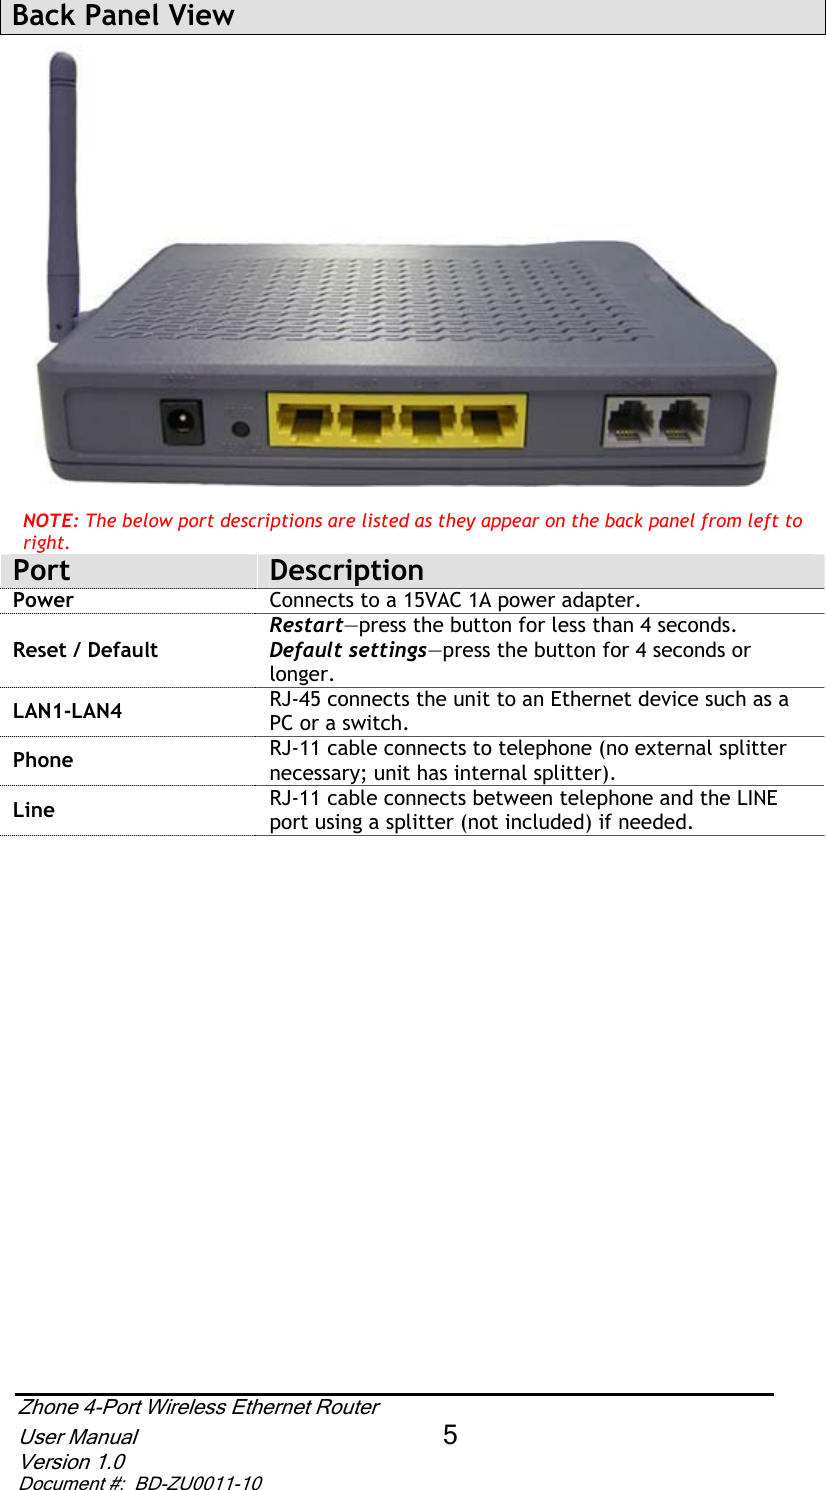 Back Panel View NOTE: The below port descriptions are listed as they appear on the back panel from left to right.Port DescriptionPower Connects to a 15VAC 1A power adapter. Restart—press the button for less than 4 seconds. Reset / Default  Default settings—press the button for 4 seconds or longer.RJ-45 connects the unit to an Ethernet device such as a PC or a switch. LAN1-LAN4RJ-11 cable connects to telephone (no external splitter necessary; unit has internal splitter).PhoneRJ-11 cable connects between telephone and the LINE port using a splitter (not included) if needed. LineZhone 4-Port Wireless Ethernet Router User Manual 5Version 1.0 Document #:  BD-ZU0011-10